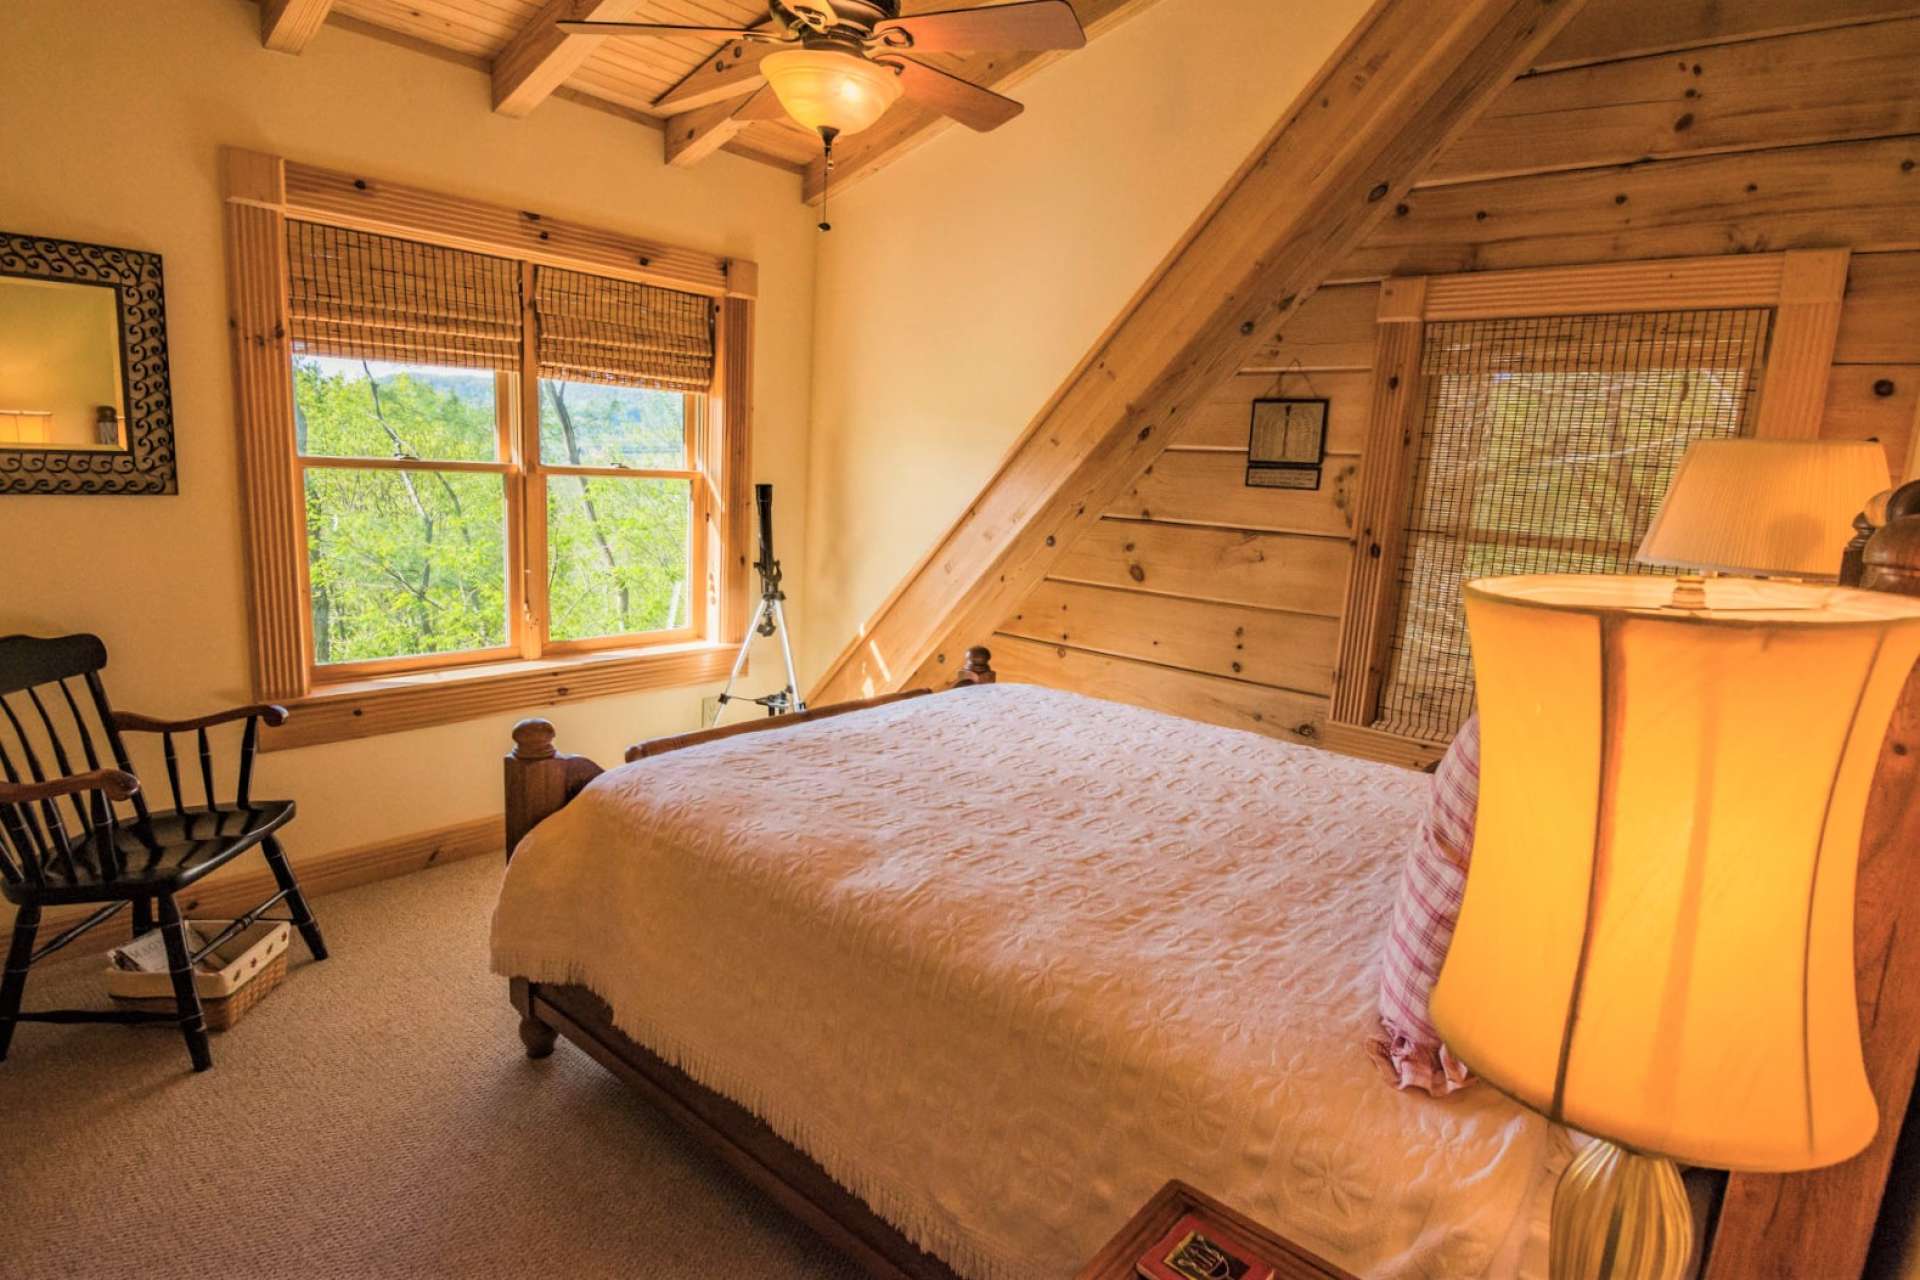 There are two guest bedrooms and a full bath on the upper level. Your guests can enjoy the views and architectural accents.